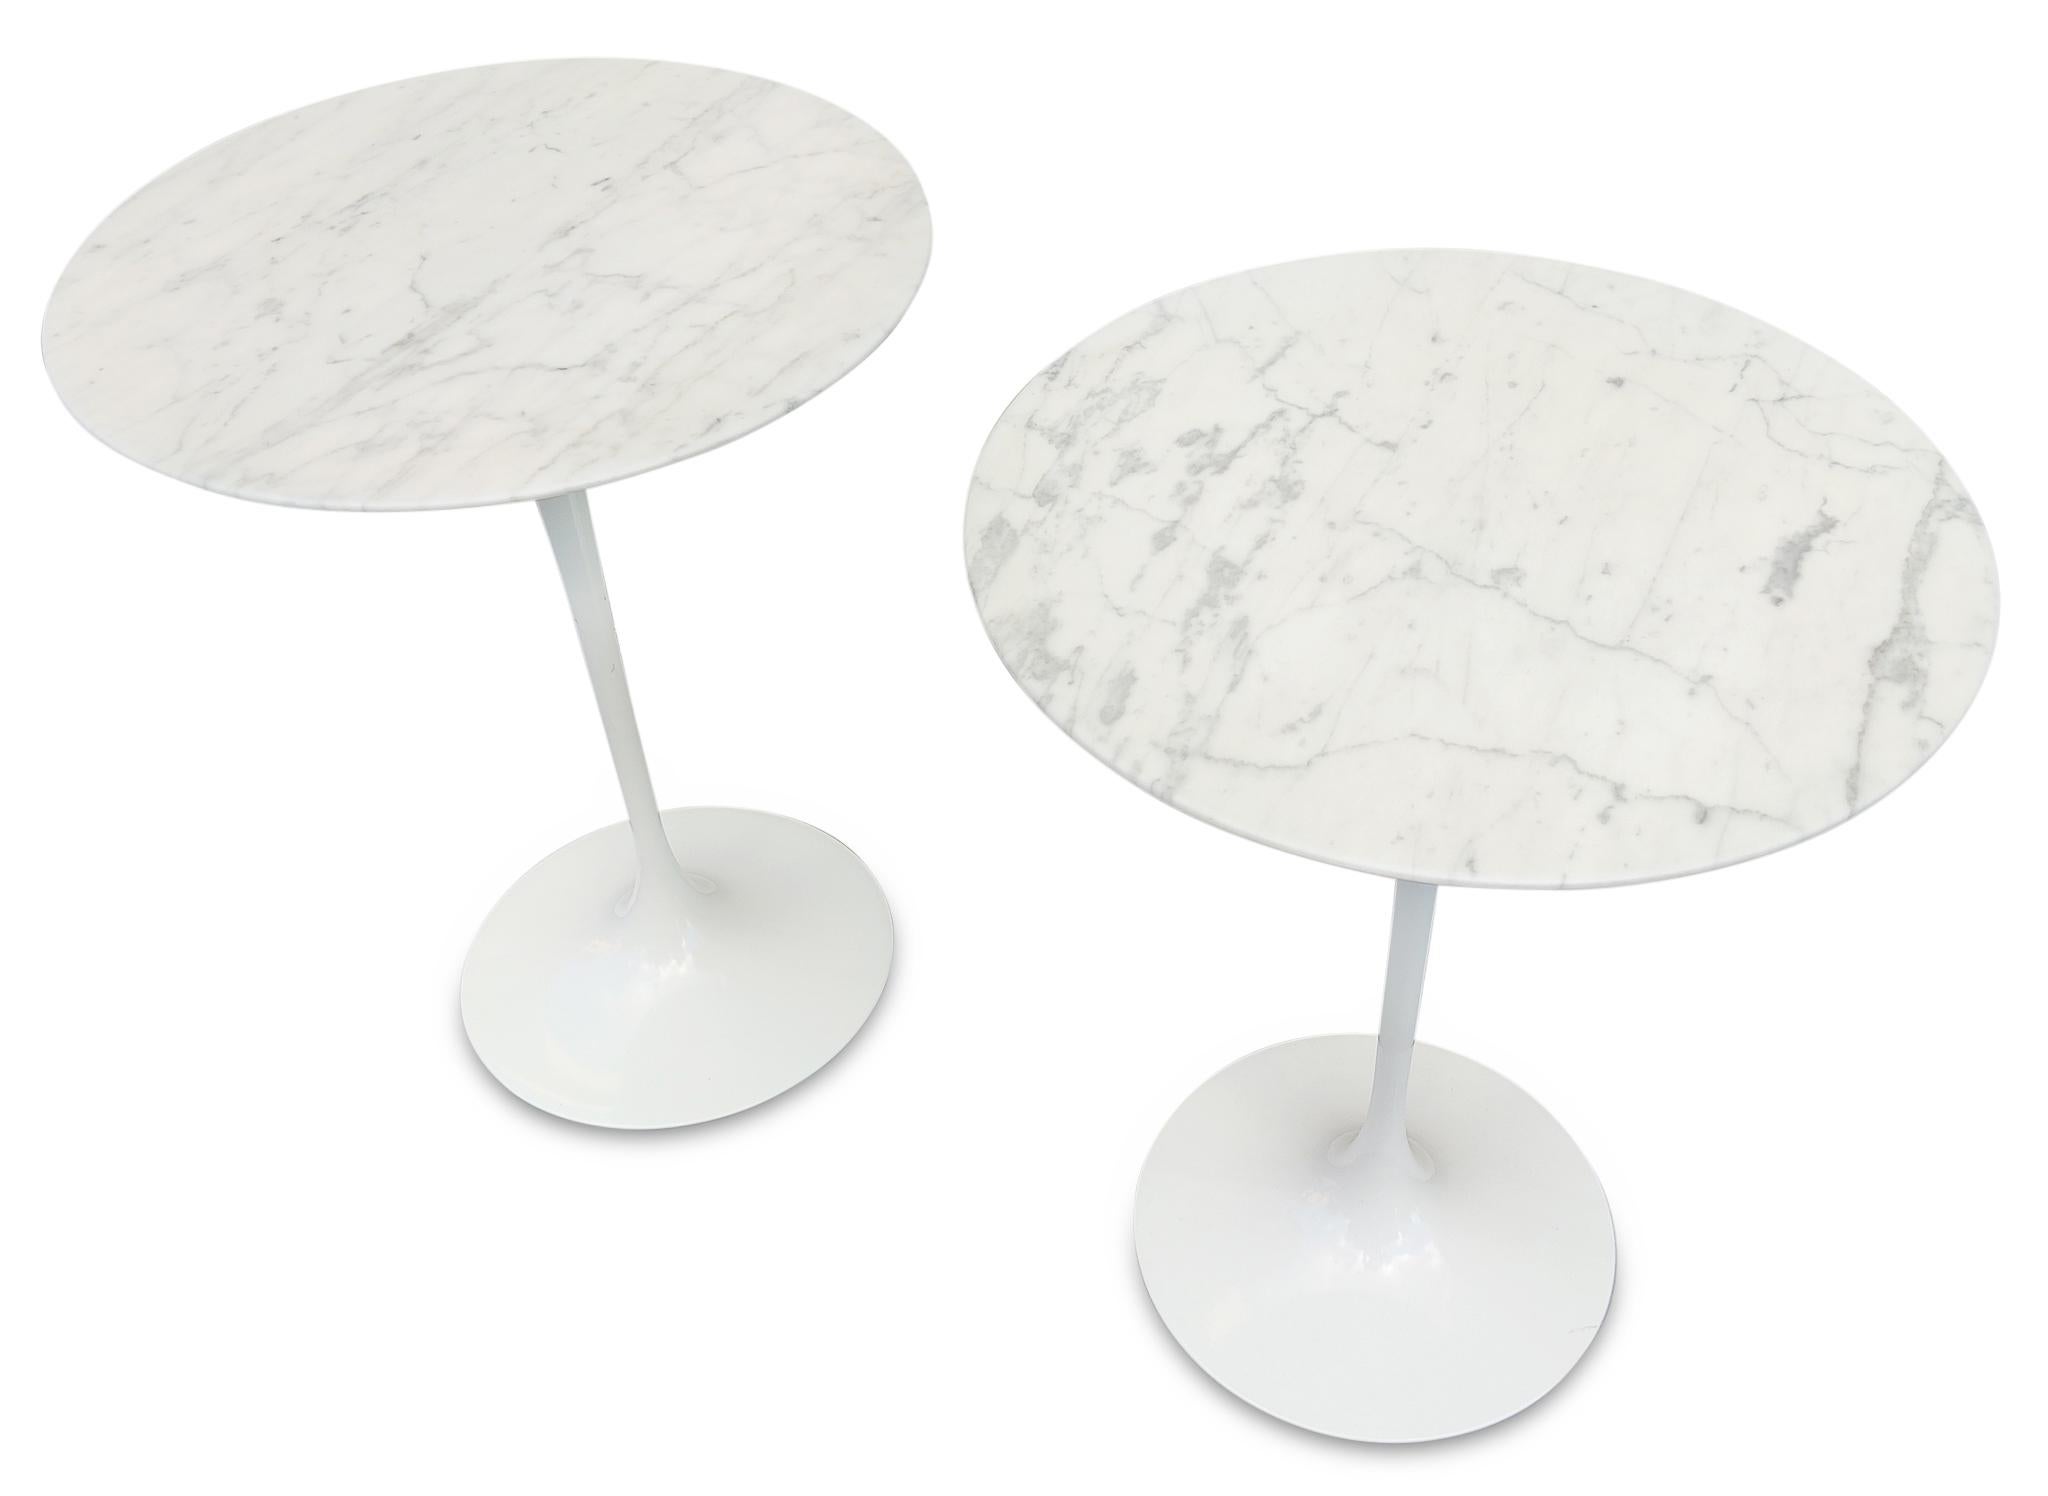 Pair of contemporary, Eero Saarinen for KnollStudio, signed marble top side tables. The tops are round, 16